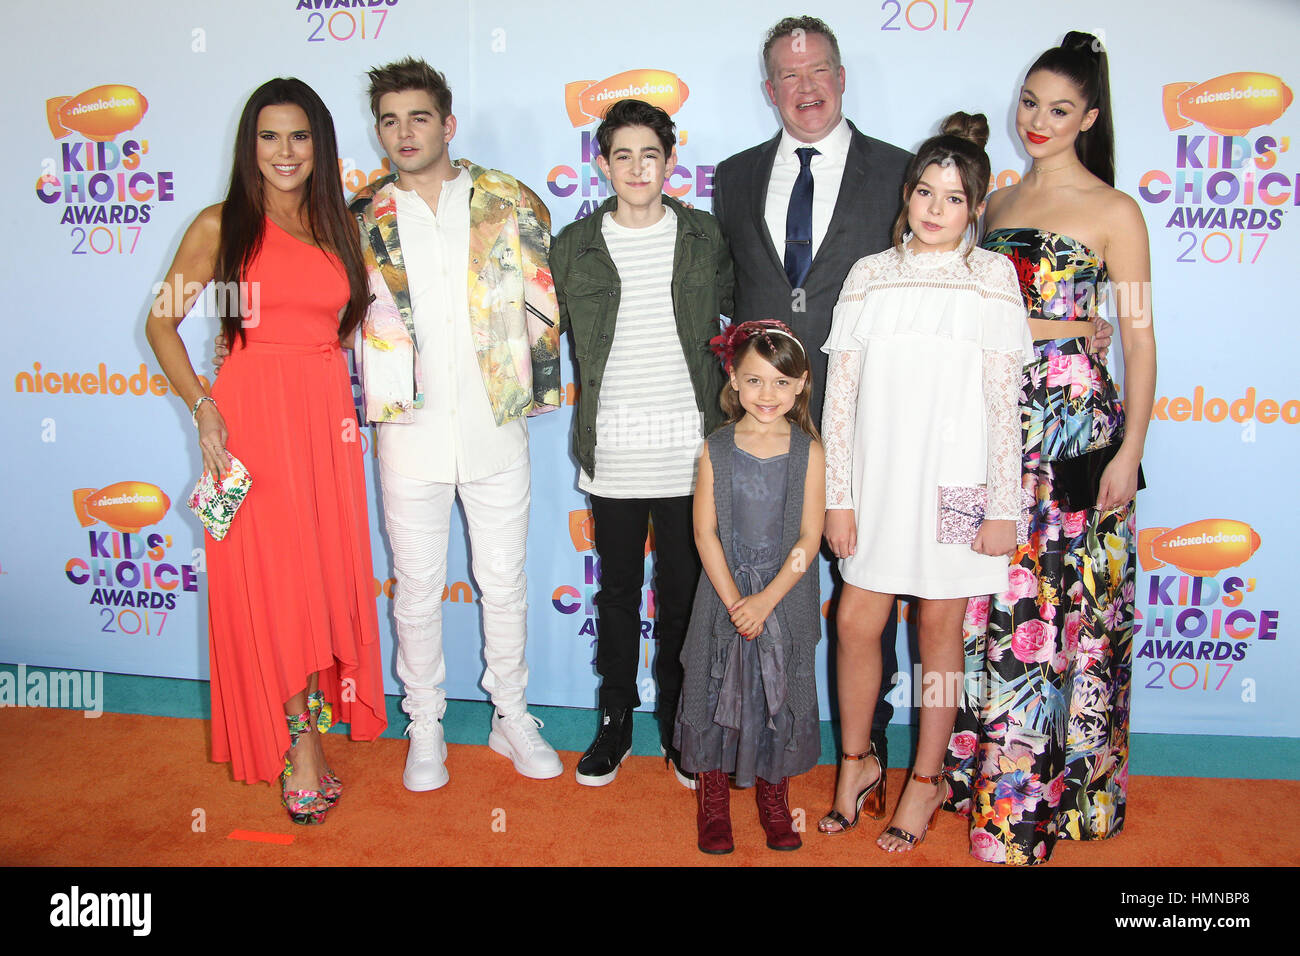 The Thundermans Photos, News, Videos and Gallery